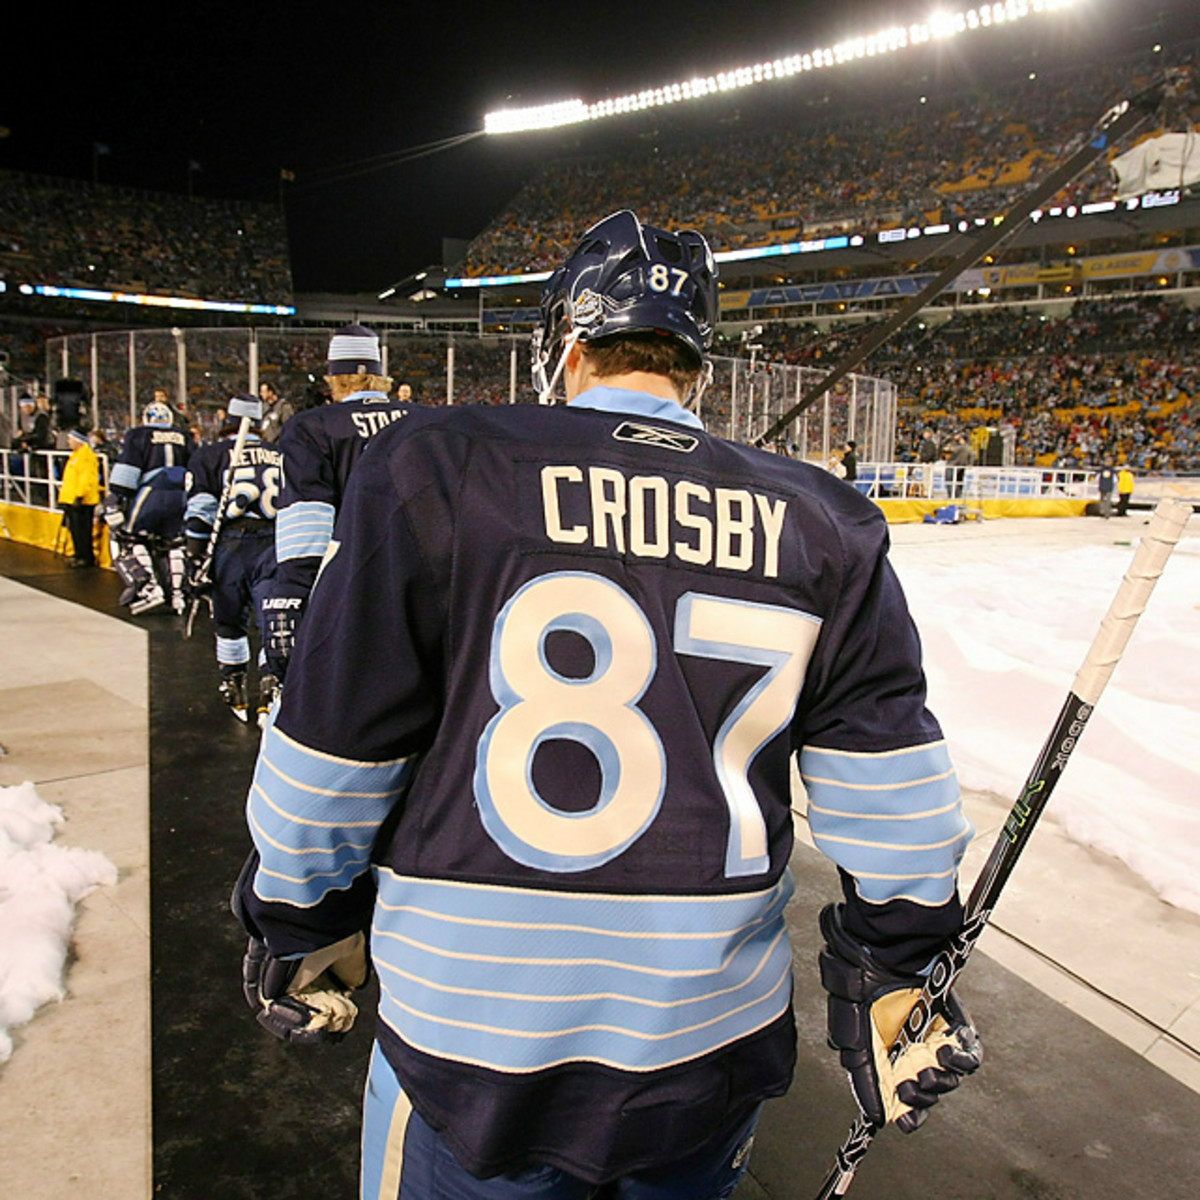 The 2011 Winter Classic in Photos